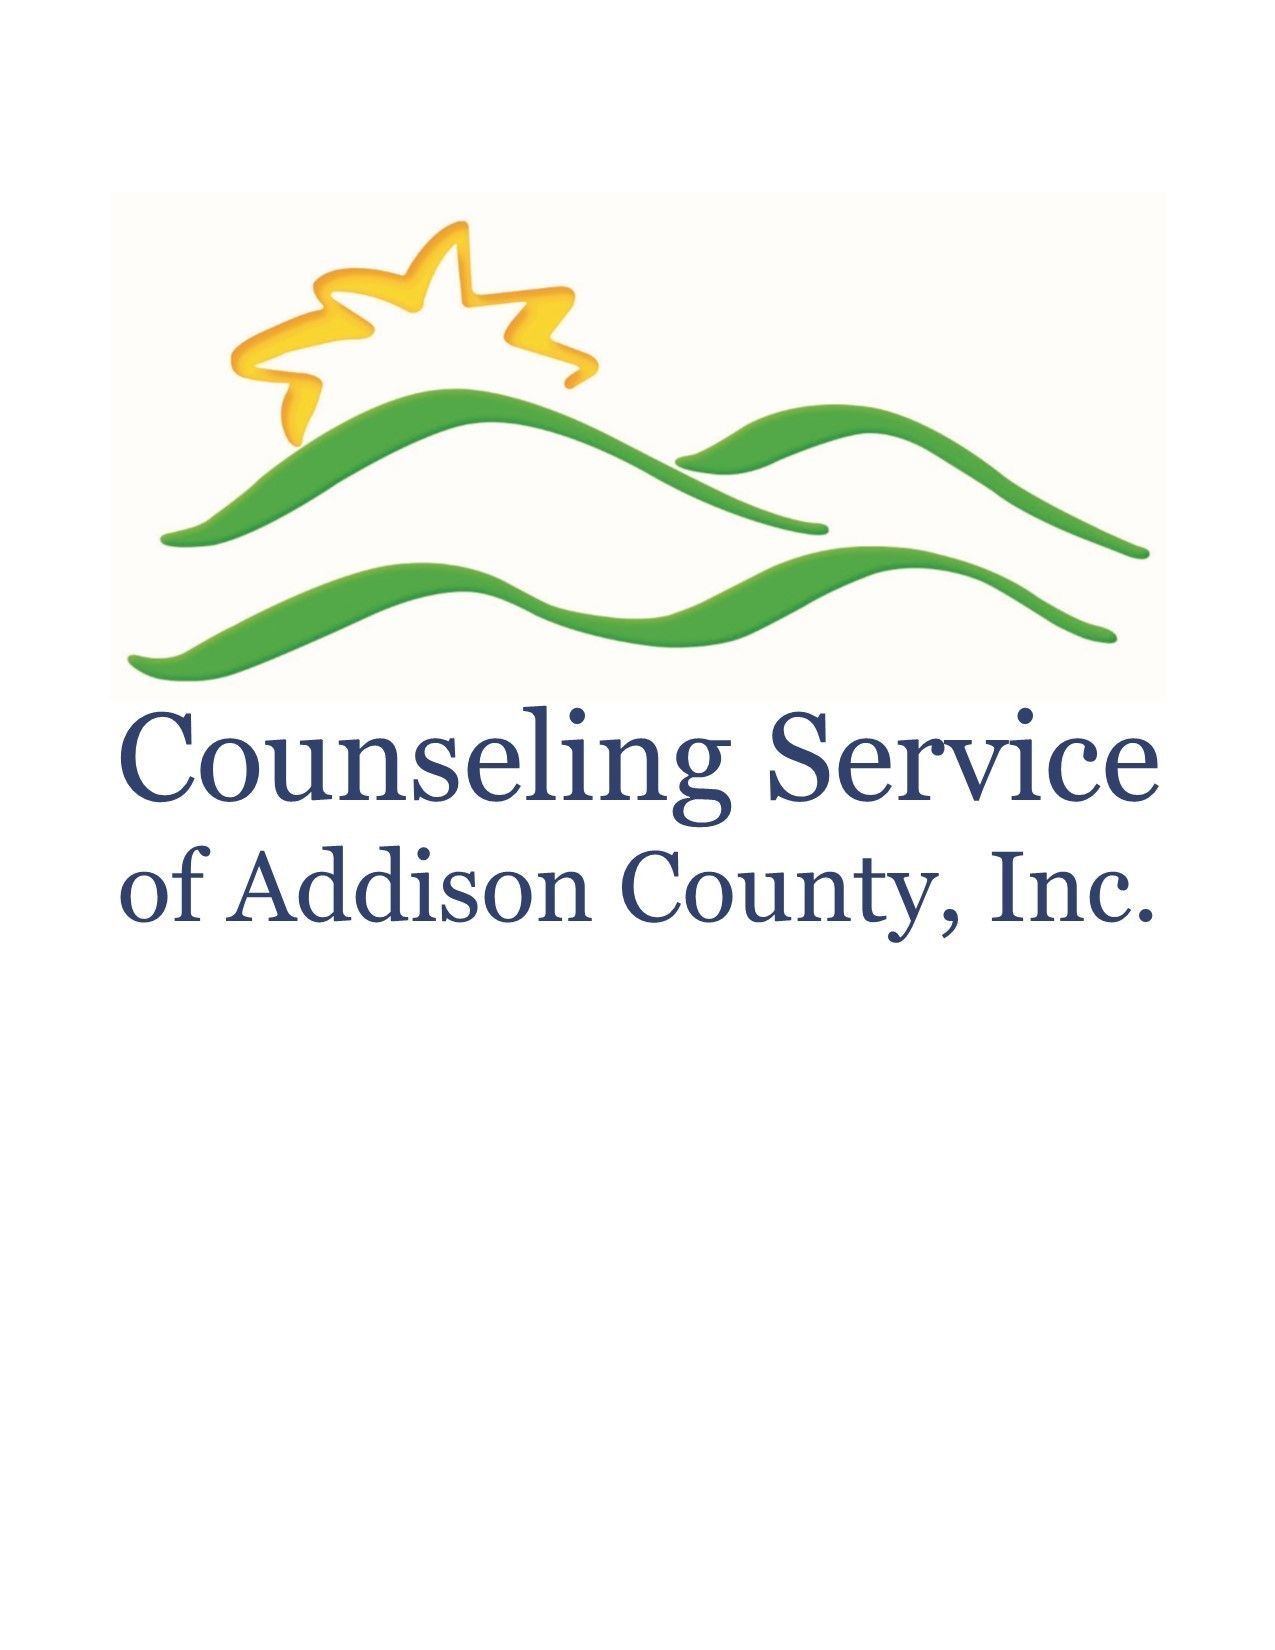 Counseling Service of Addison County logo. Sunrise over mountains.